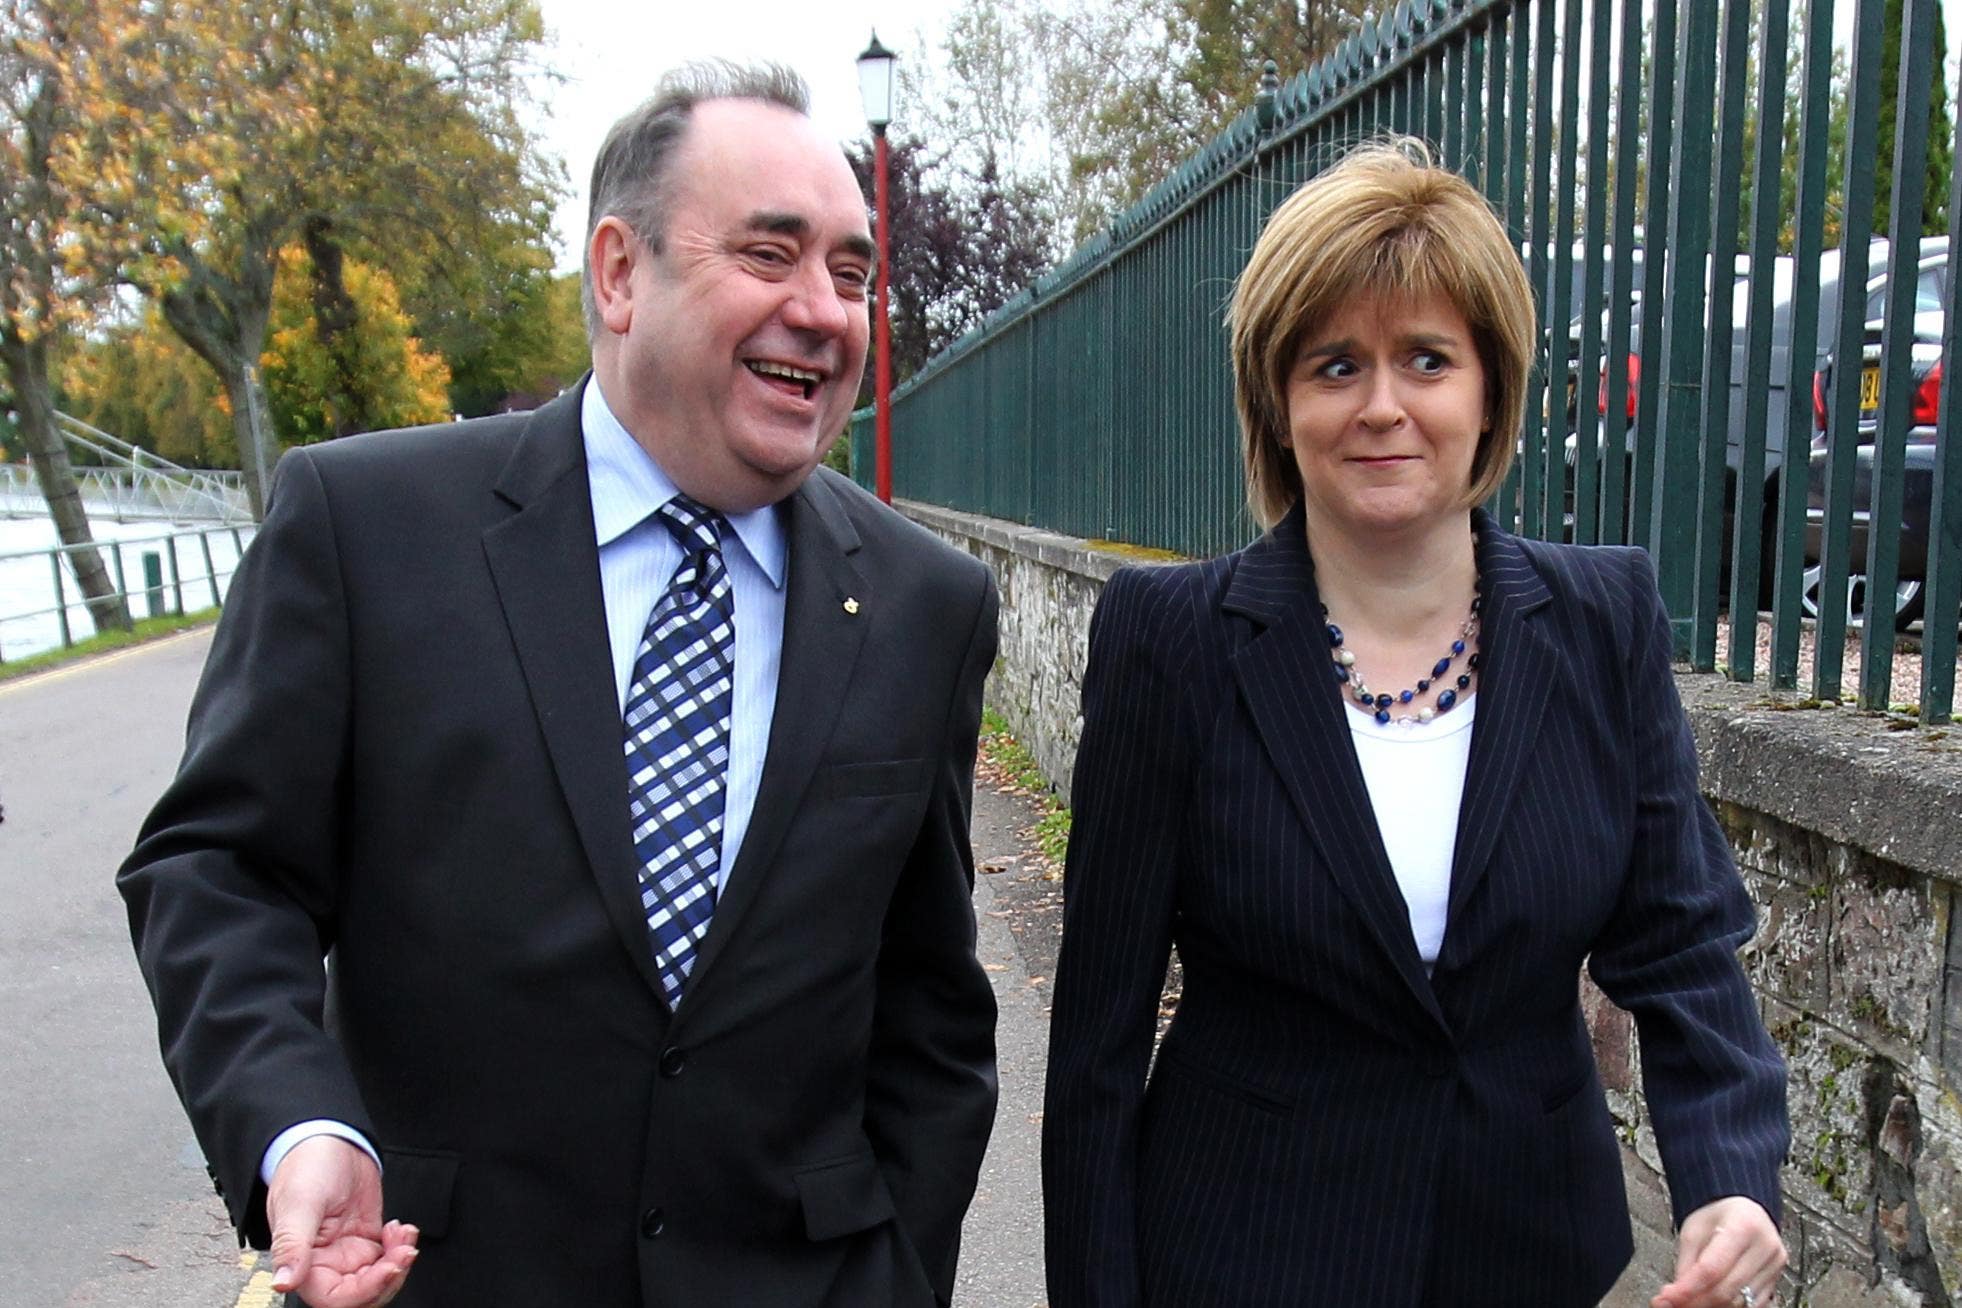 Sturgeon has said she has no interest in reconciling with Salmond